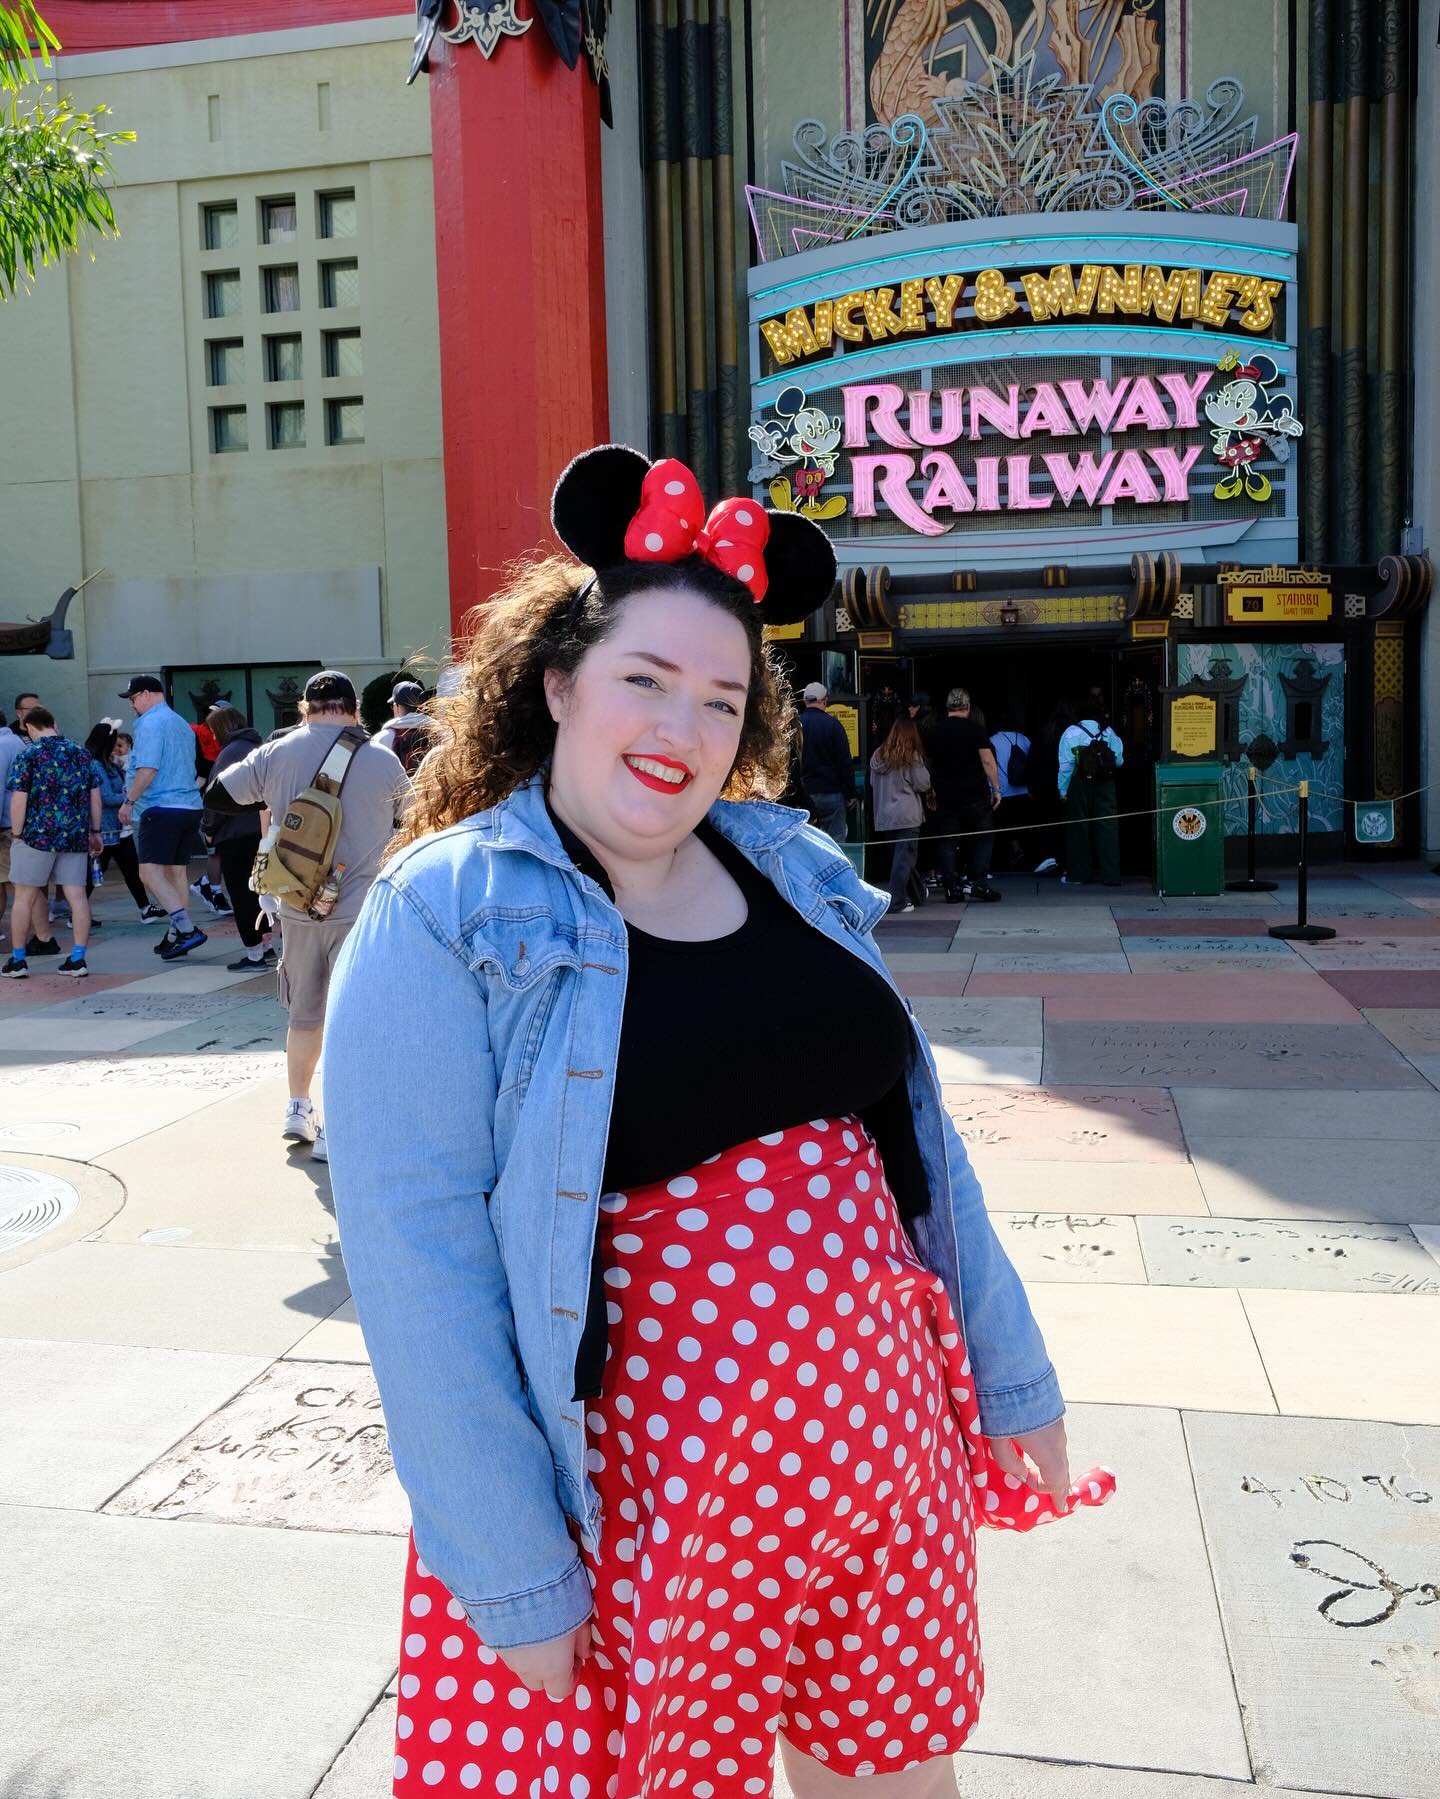 Hooray for Hollywood! 🎥🎞️🎬 

Happy 35th birthday to my favorite Disney World park, Disney&rsquo;s Hollywood Studios! Can you believe we&rsquo;re both turning 35 this year? I&rsquo;ve always loved feeling like I&rsquo;m part of the movies, and then